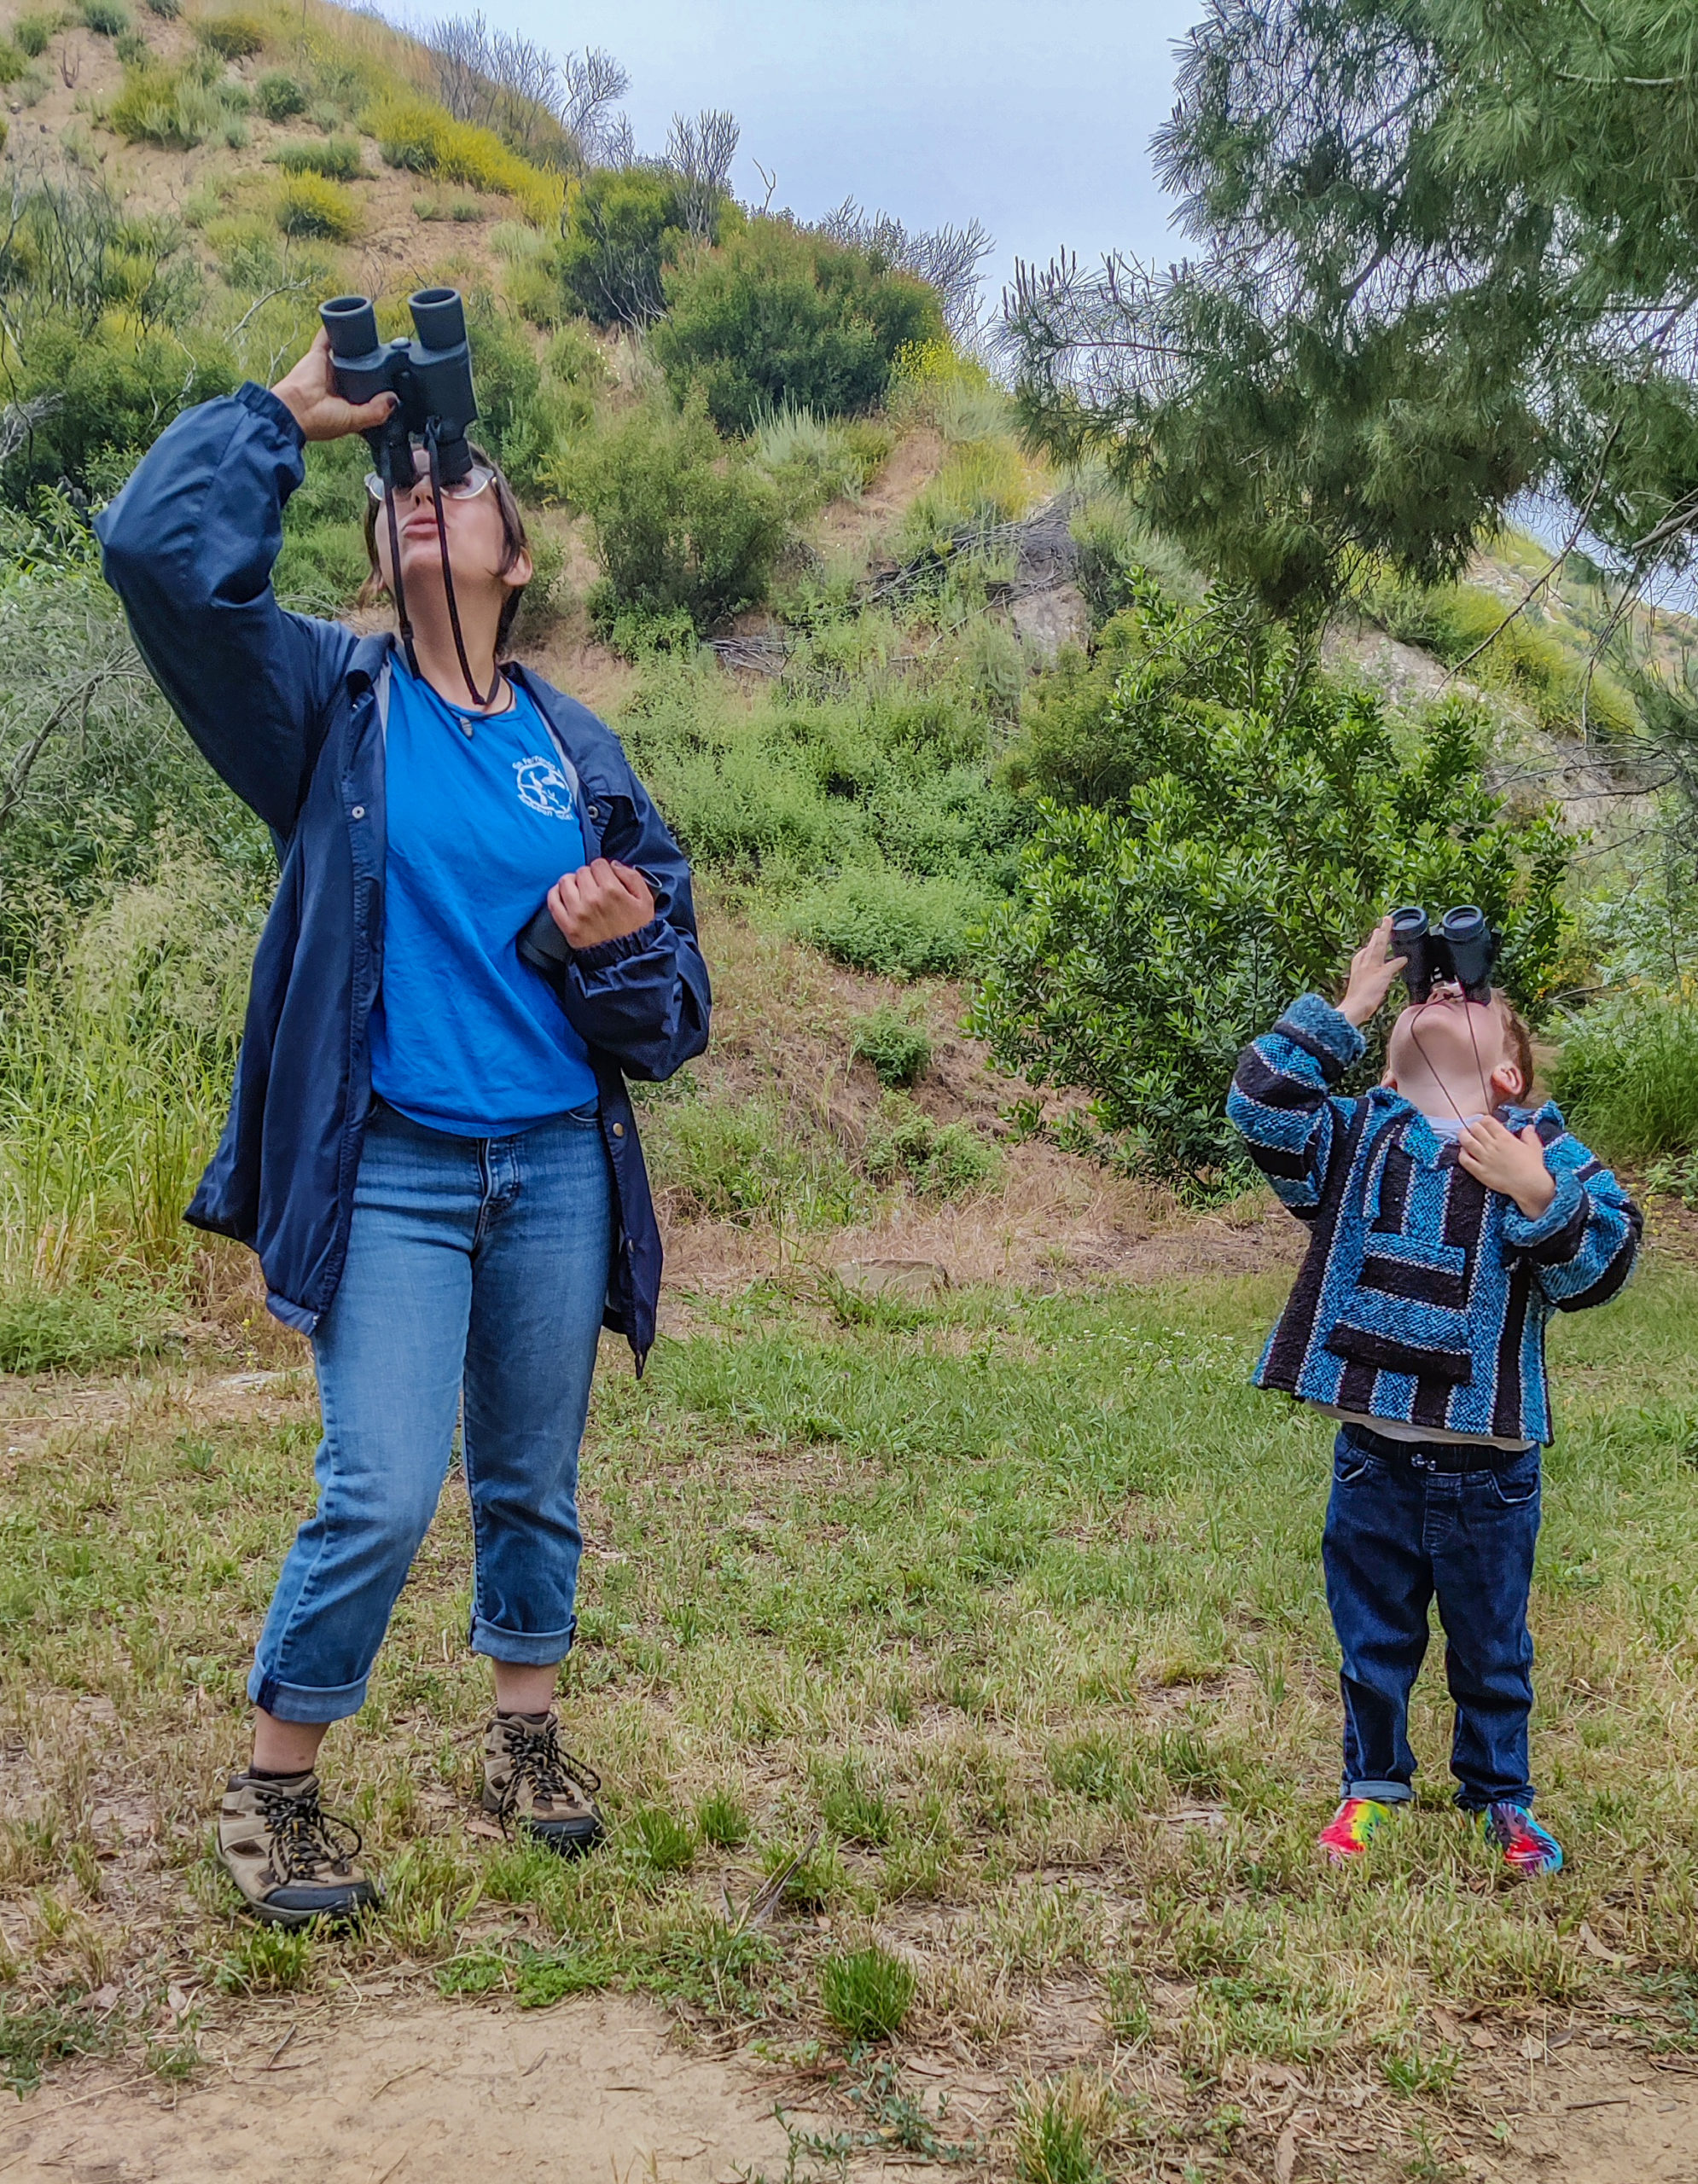 A person and child looking through binoculars Description automatically generated